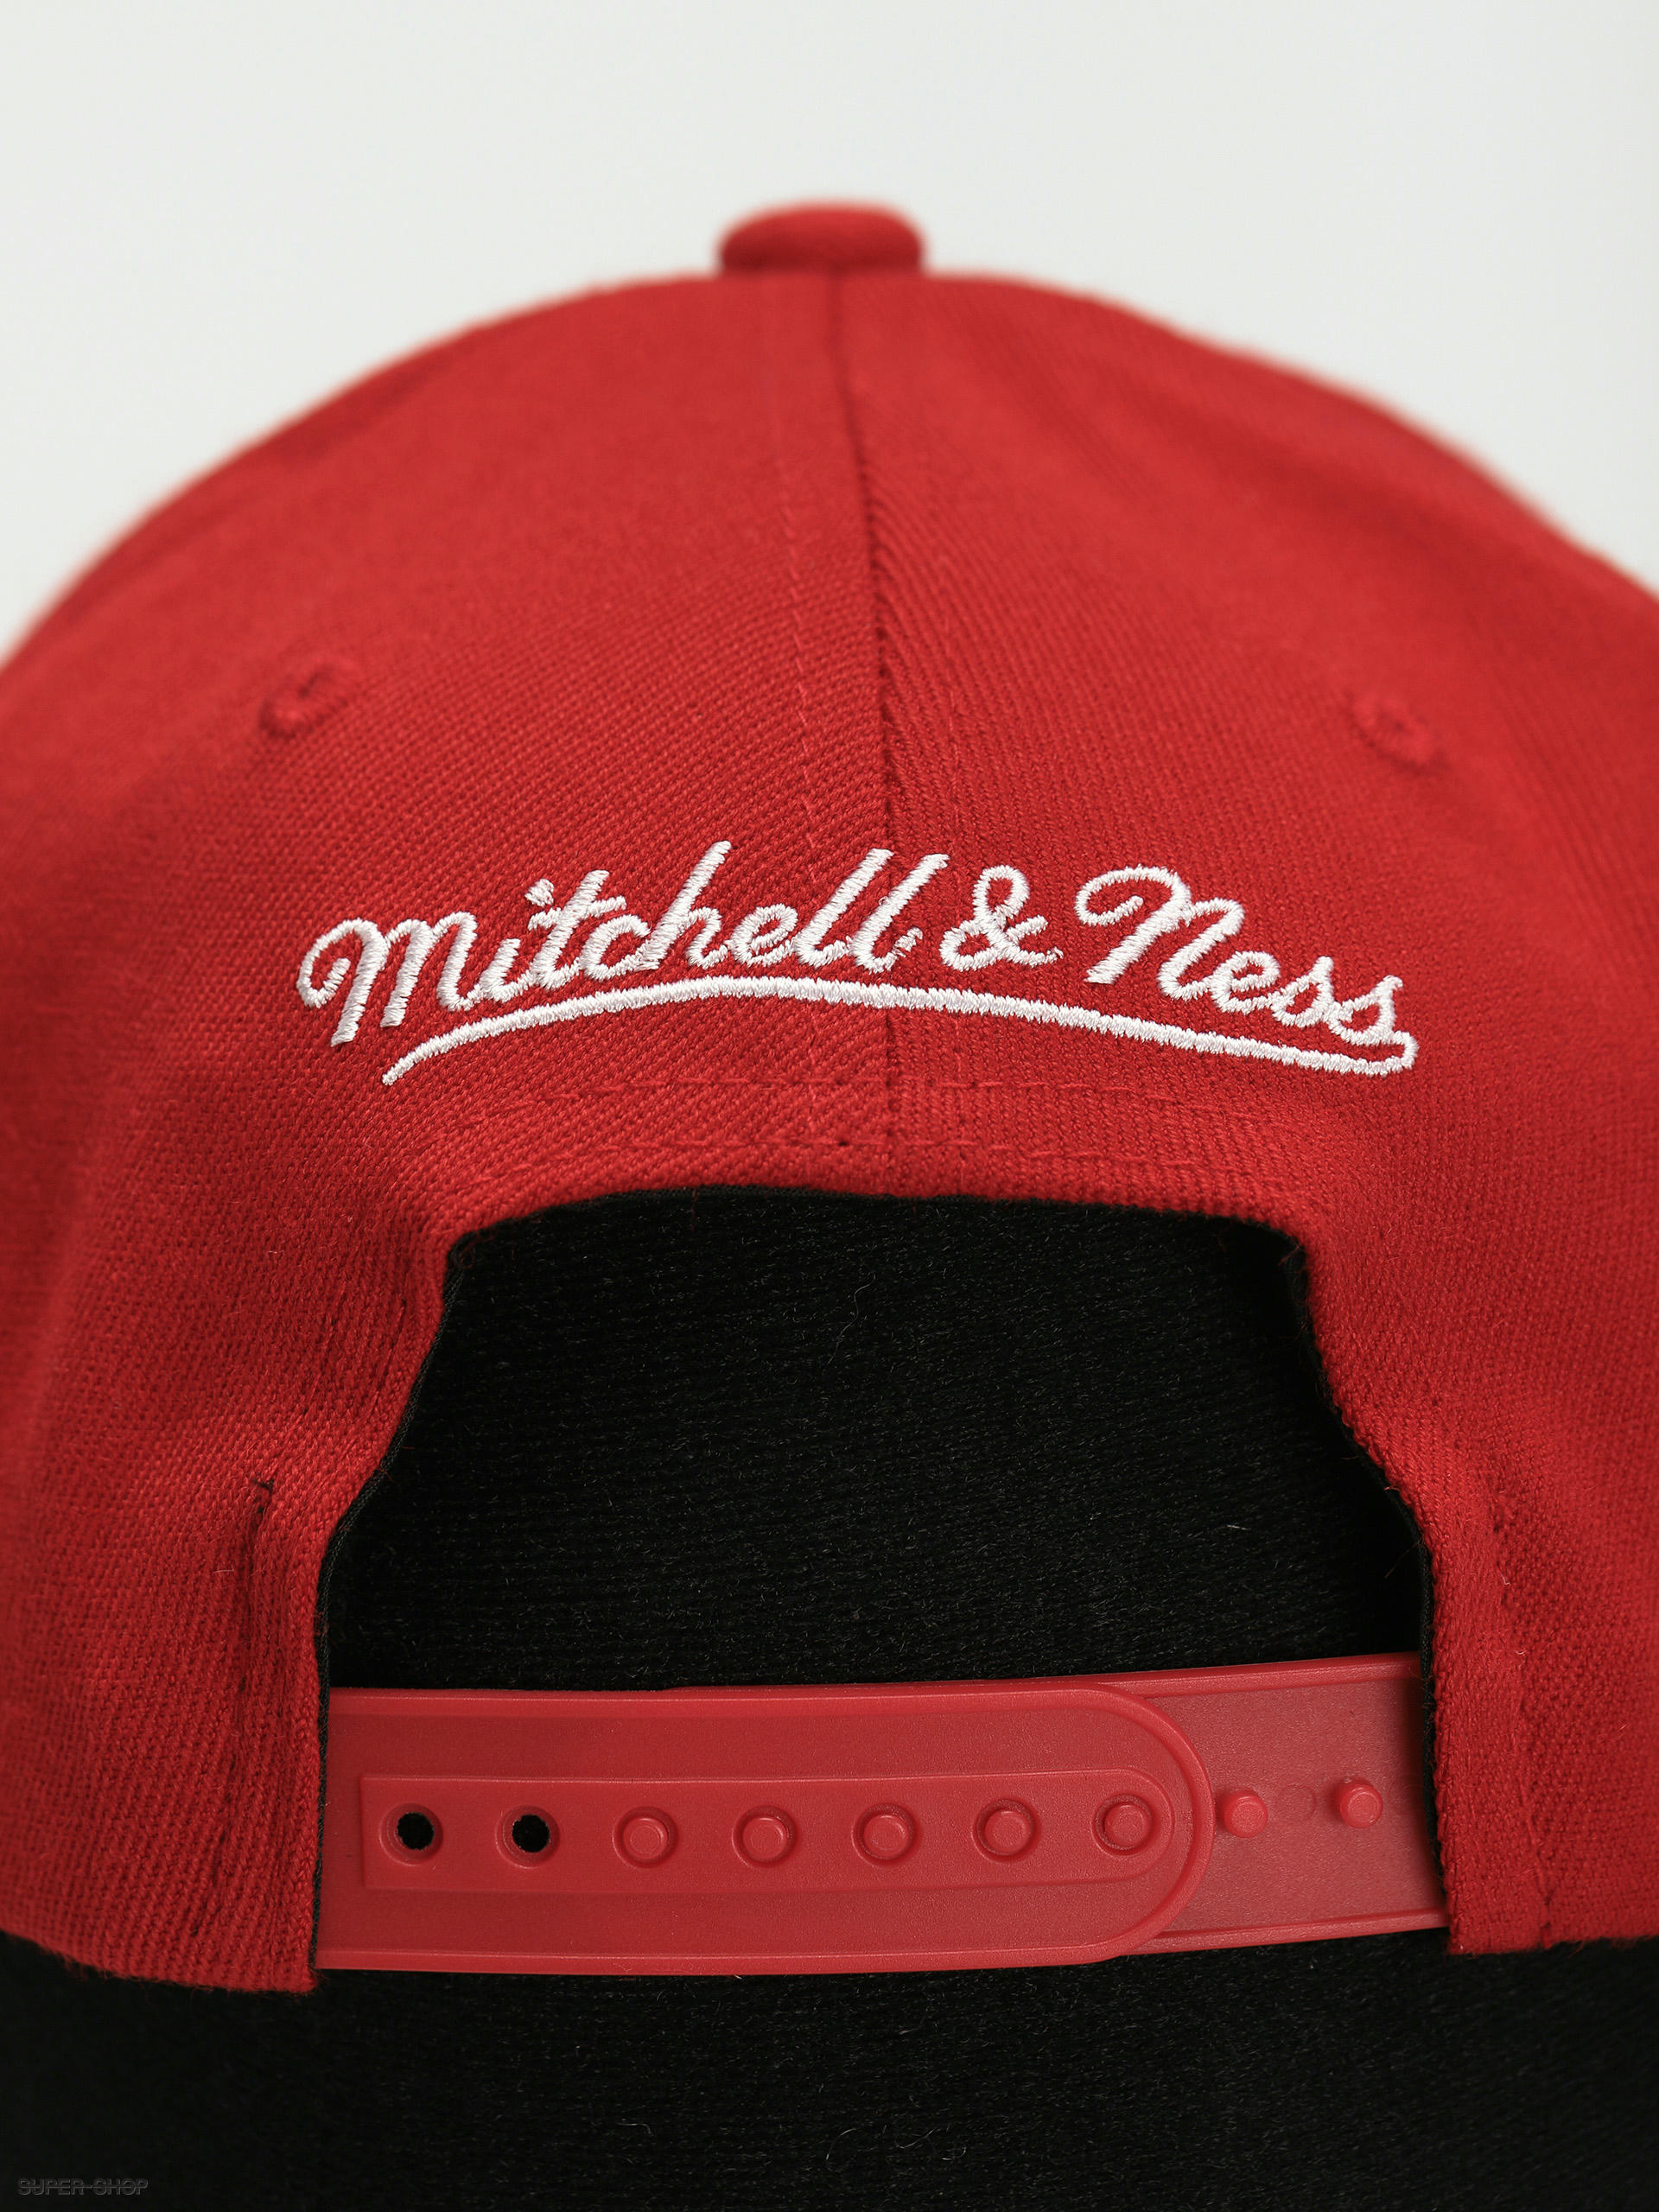 Mitchell & Ness Team Script 2.0 Chicago Bulls Snapback Hat - Red - One Size